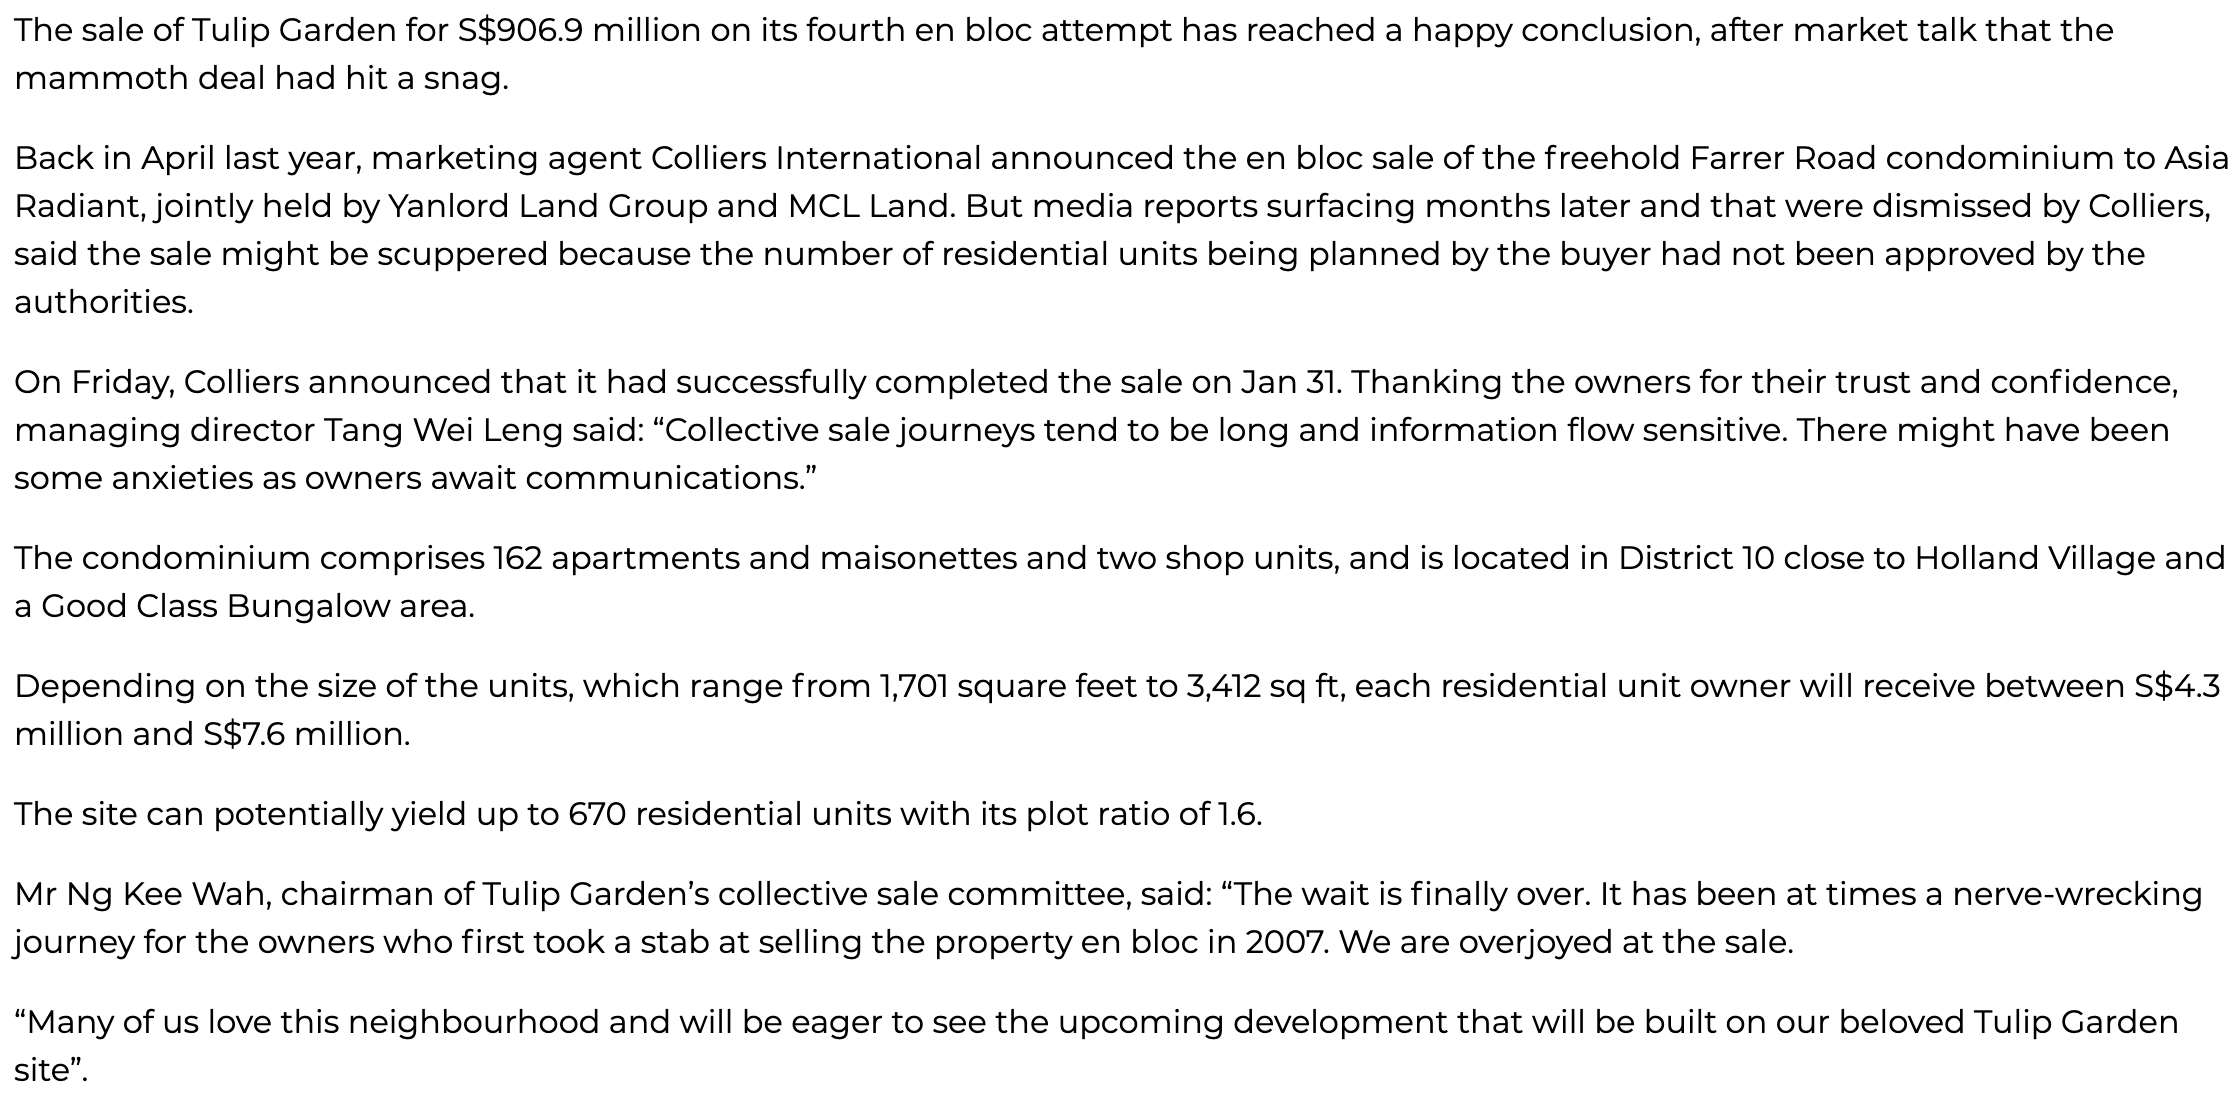 tulip-garden-S$907m-collective-sale-to-yanlord-mcl-successfully-completed